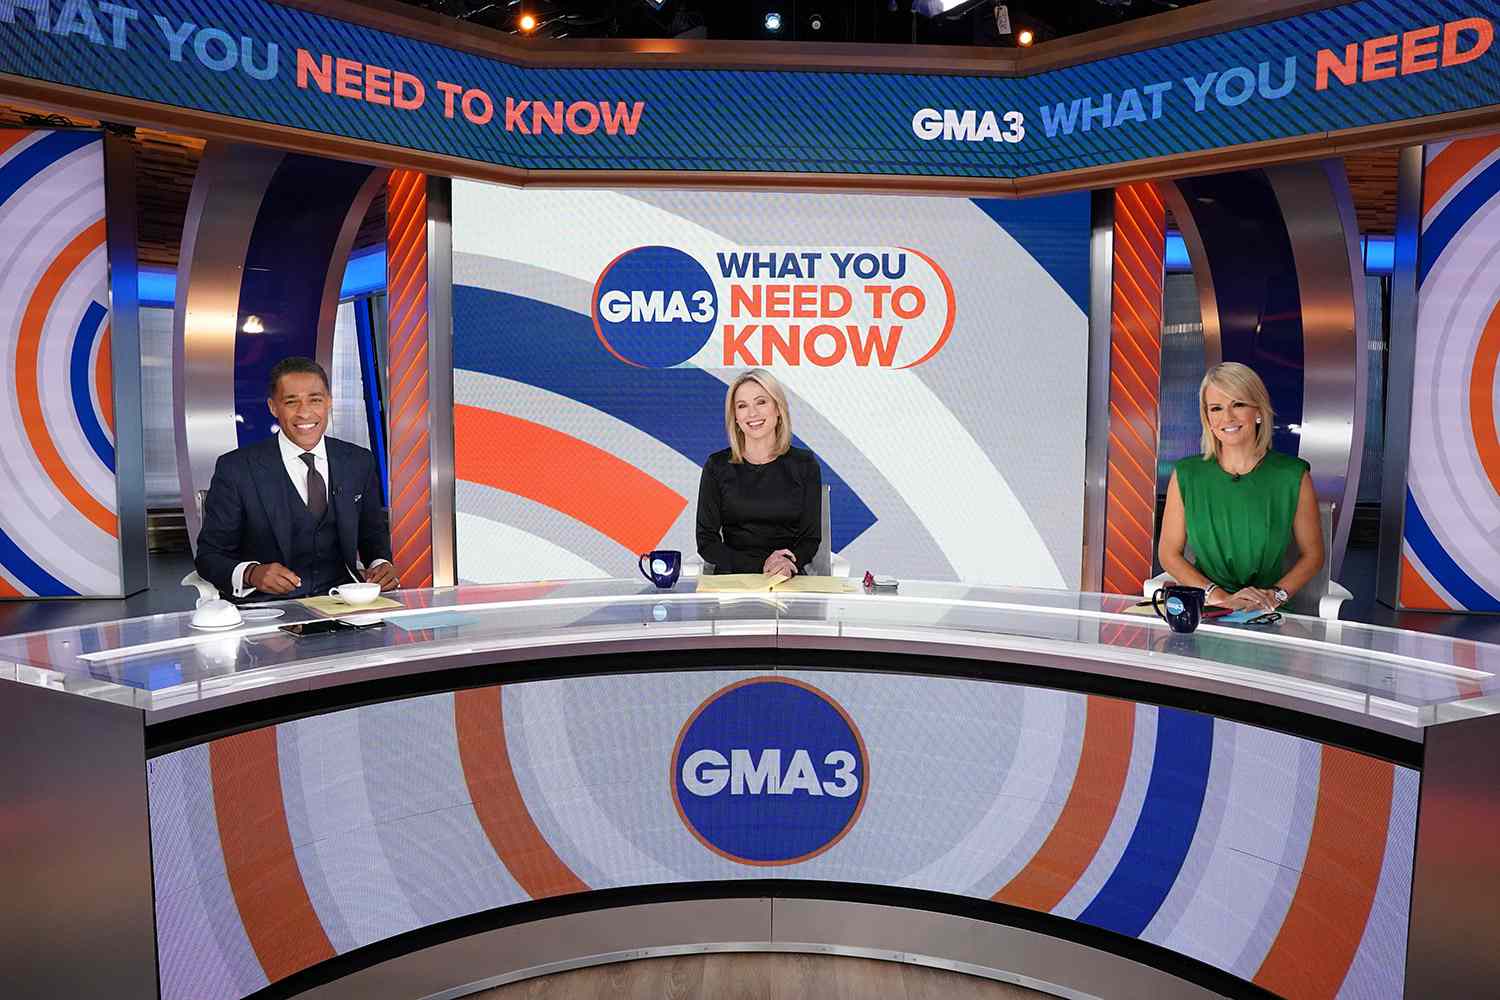 GMA3: WHAT YOU NEED TO KNOW